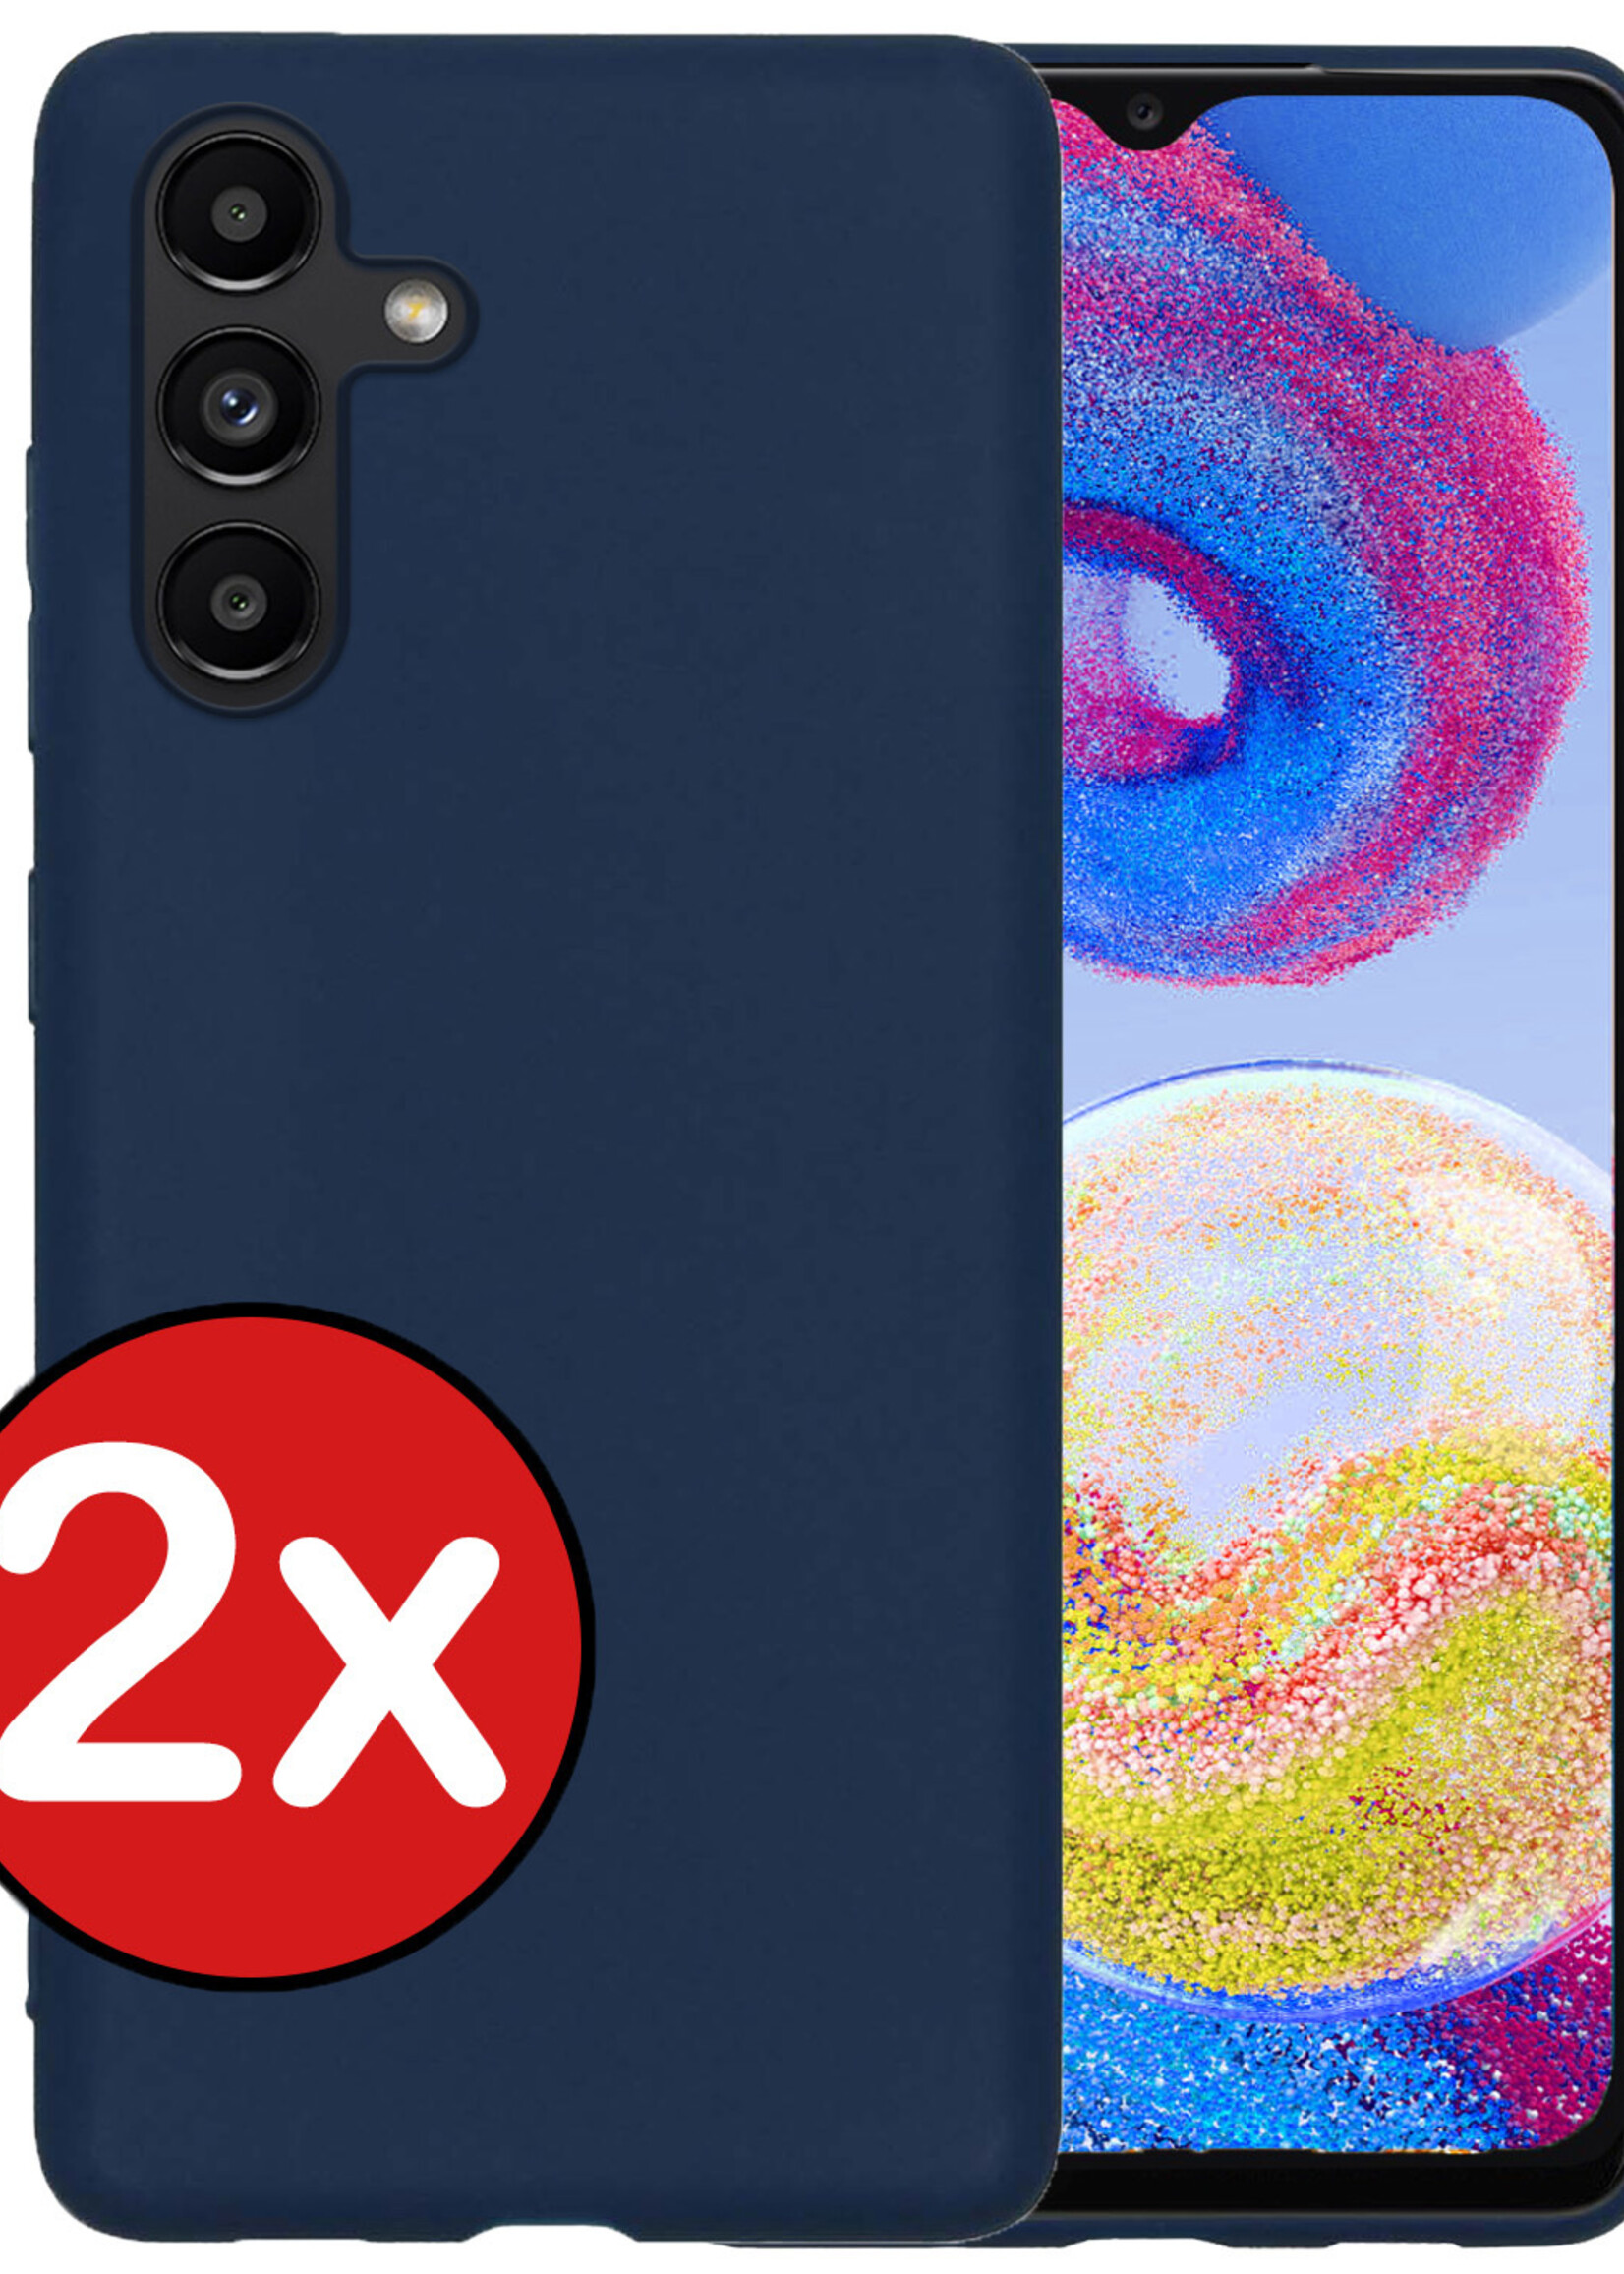 BTH Hoesje Geschikt voor Samsung A04s Hoesje Siliconen Case Hoes - Hoes Geschikt voor Samsung Galaxy A04s Hoes Cover Case - Donkerblauw - 2 PACK